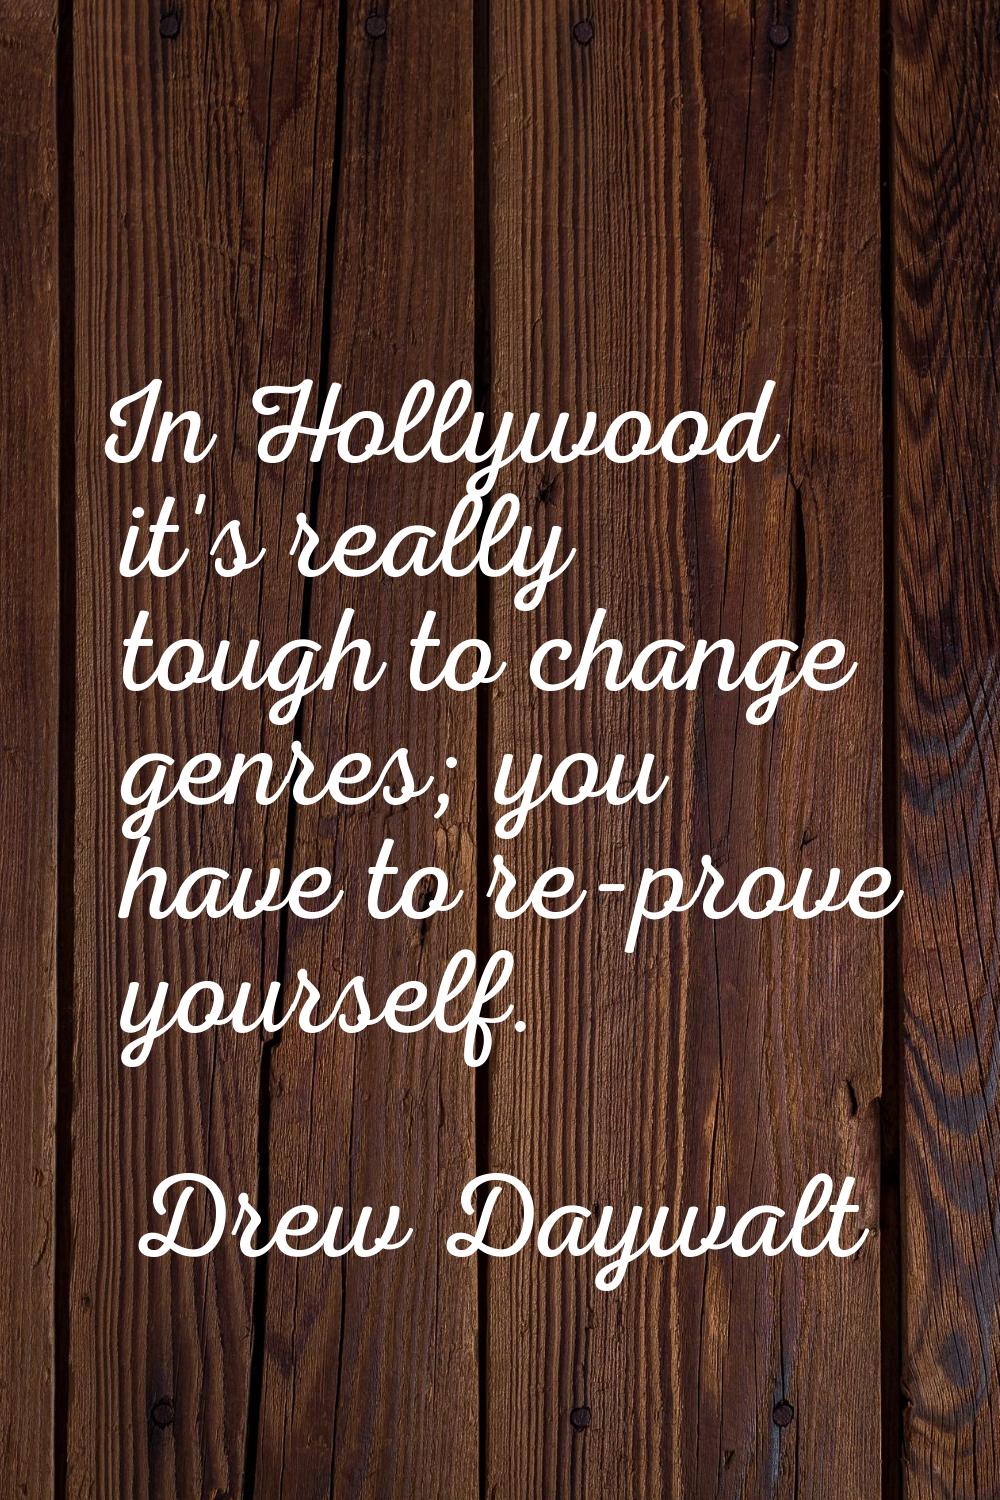 In Hollywood it's really tough to change genres; you have to re-prove yourself.